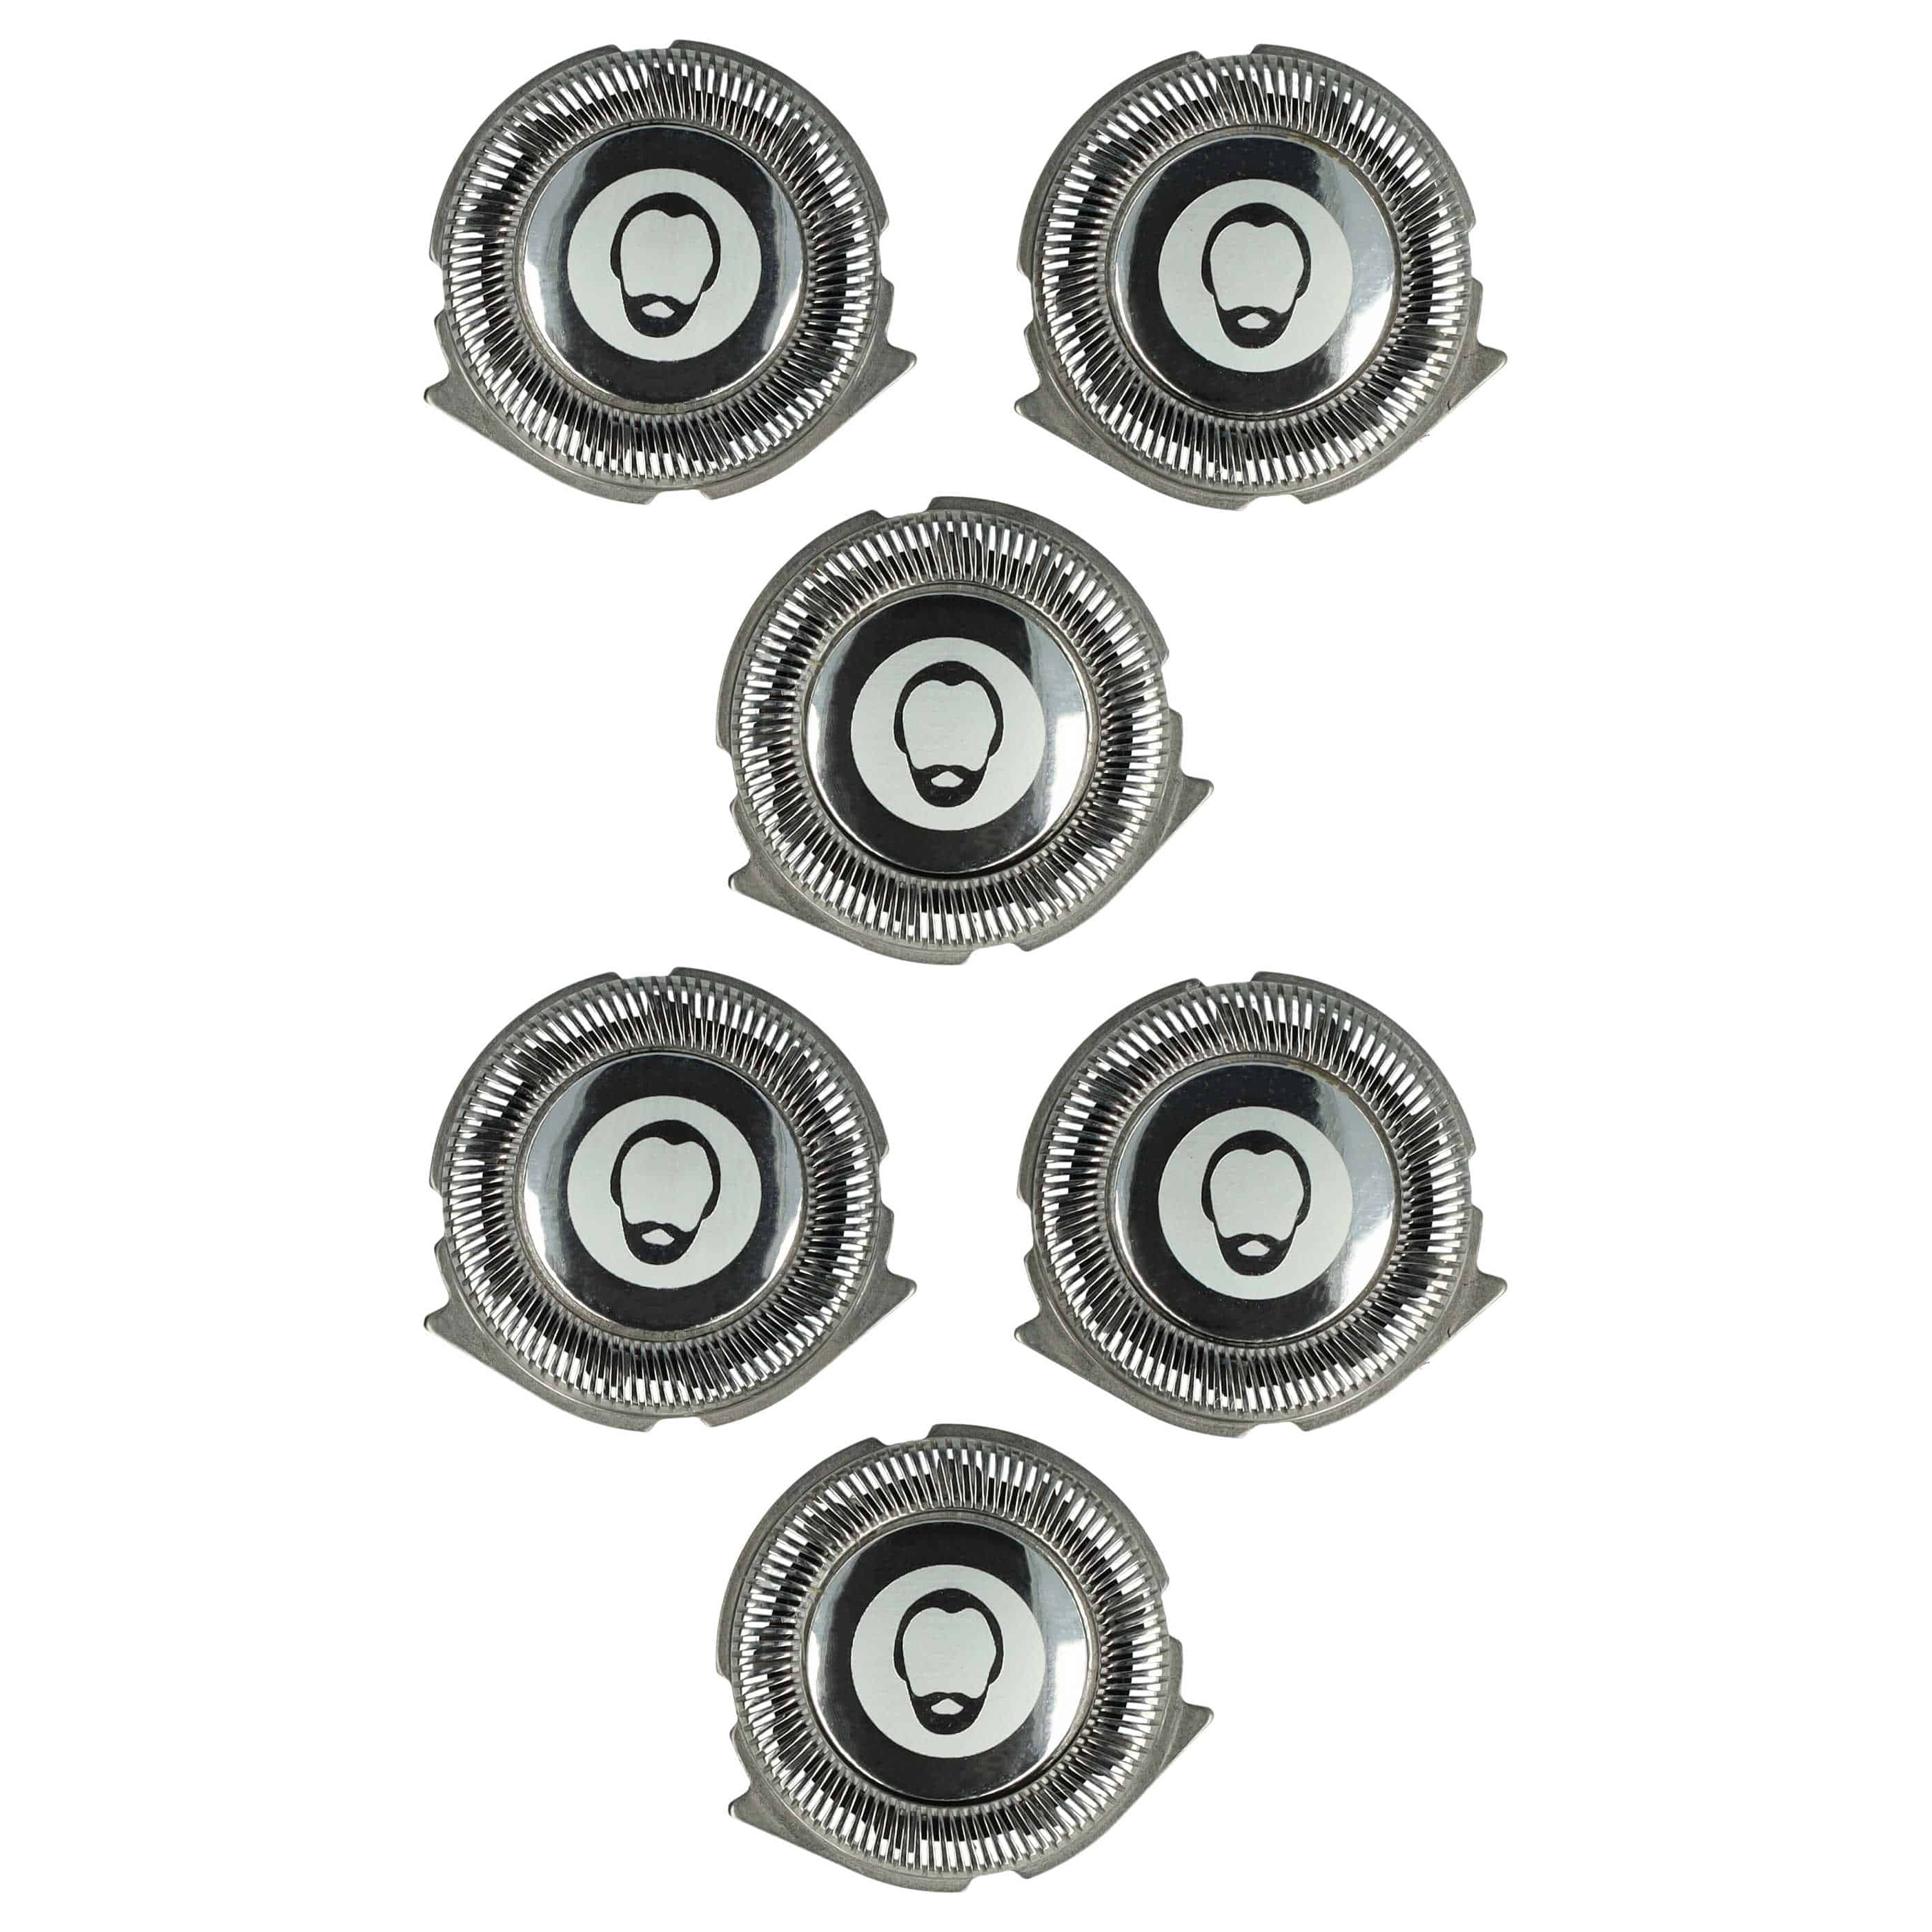 6x shaving head as Replacement for Philips SH30, SH30/50 for Philips Shaver -nickel